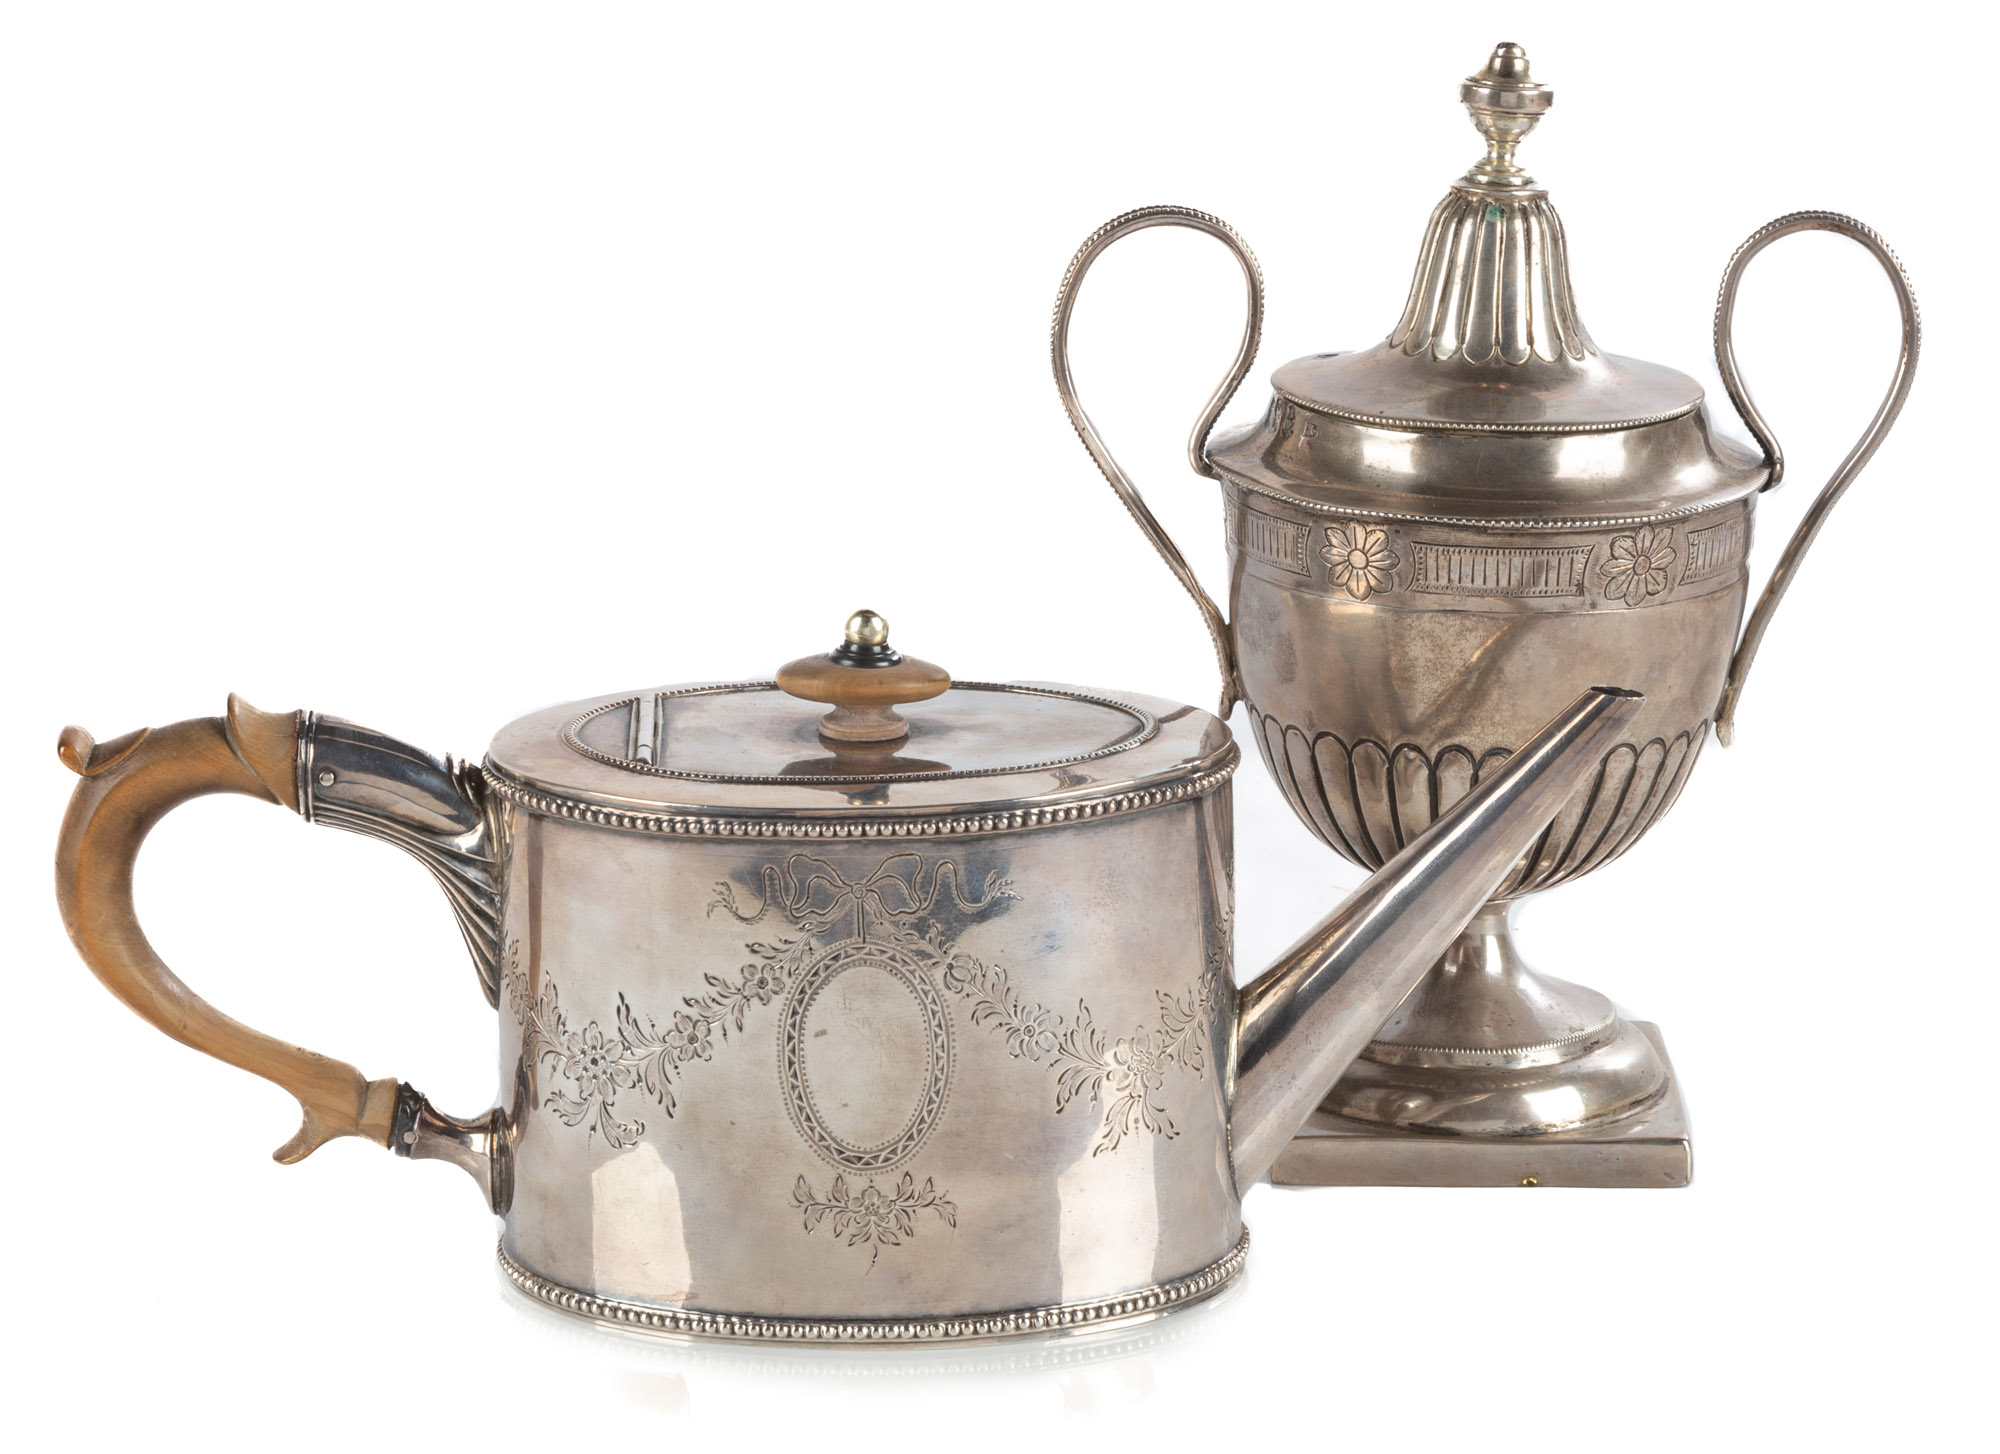 GEORGE III STERLING SILVER TEAPOT 28bc87